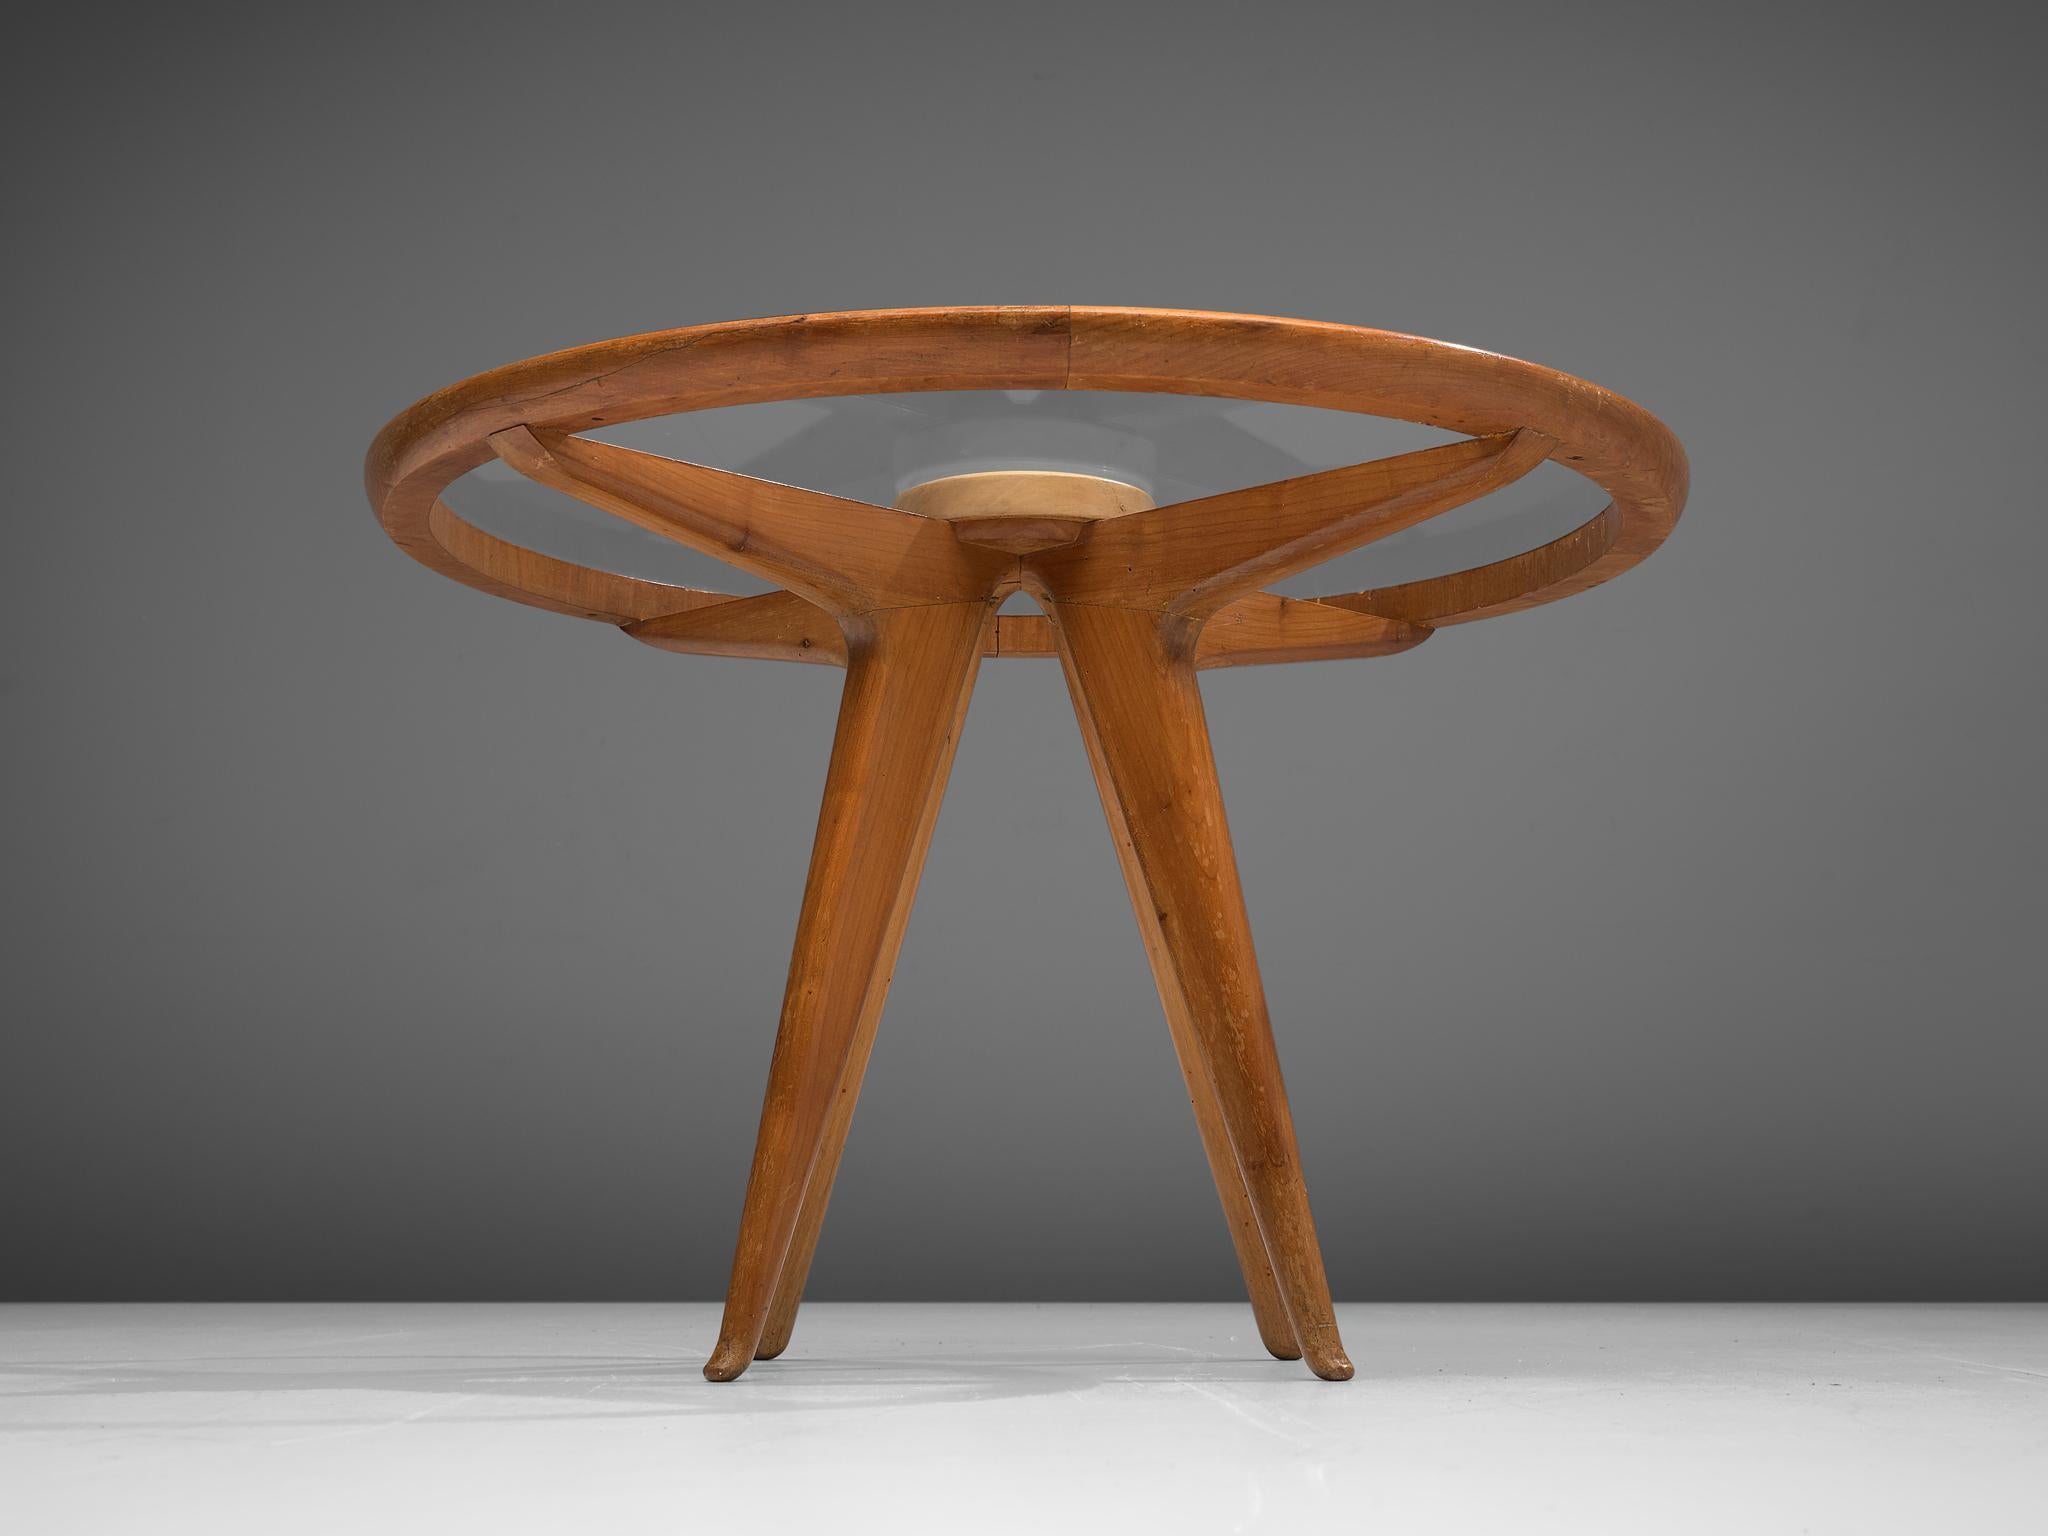 Coffee table, Italian walnut, glass, Italy, 1960s

Round coffee table with glass table top, manufactured in Italian walnut. This coffee table has a beautiful open structure due to the glass table top. This way the construction of the legs,